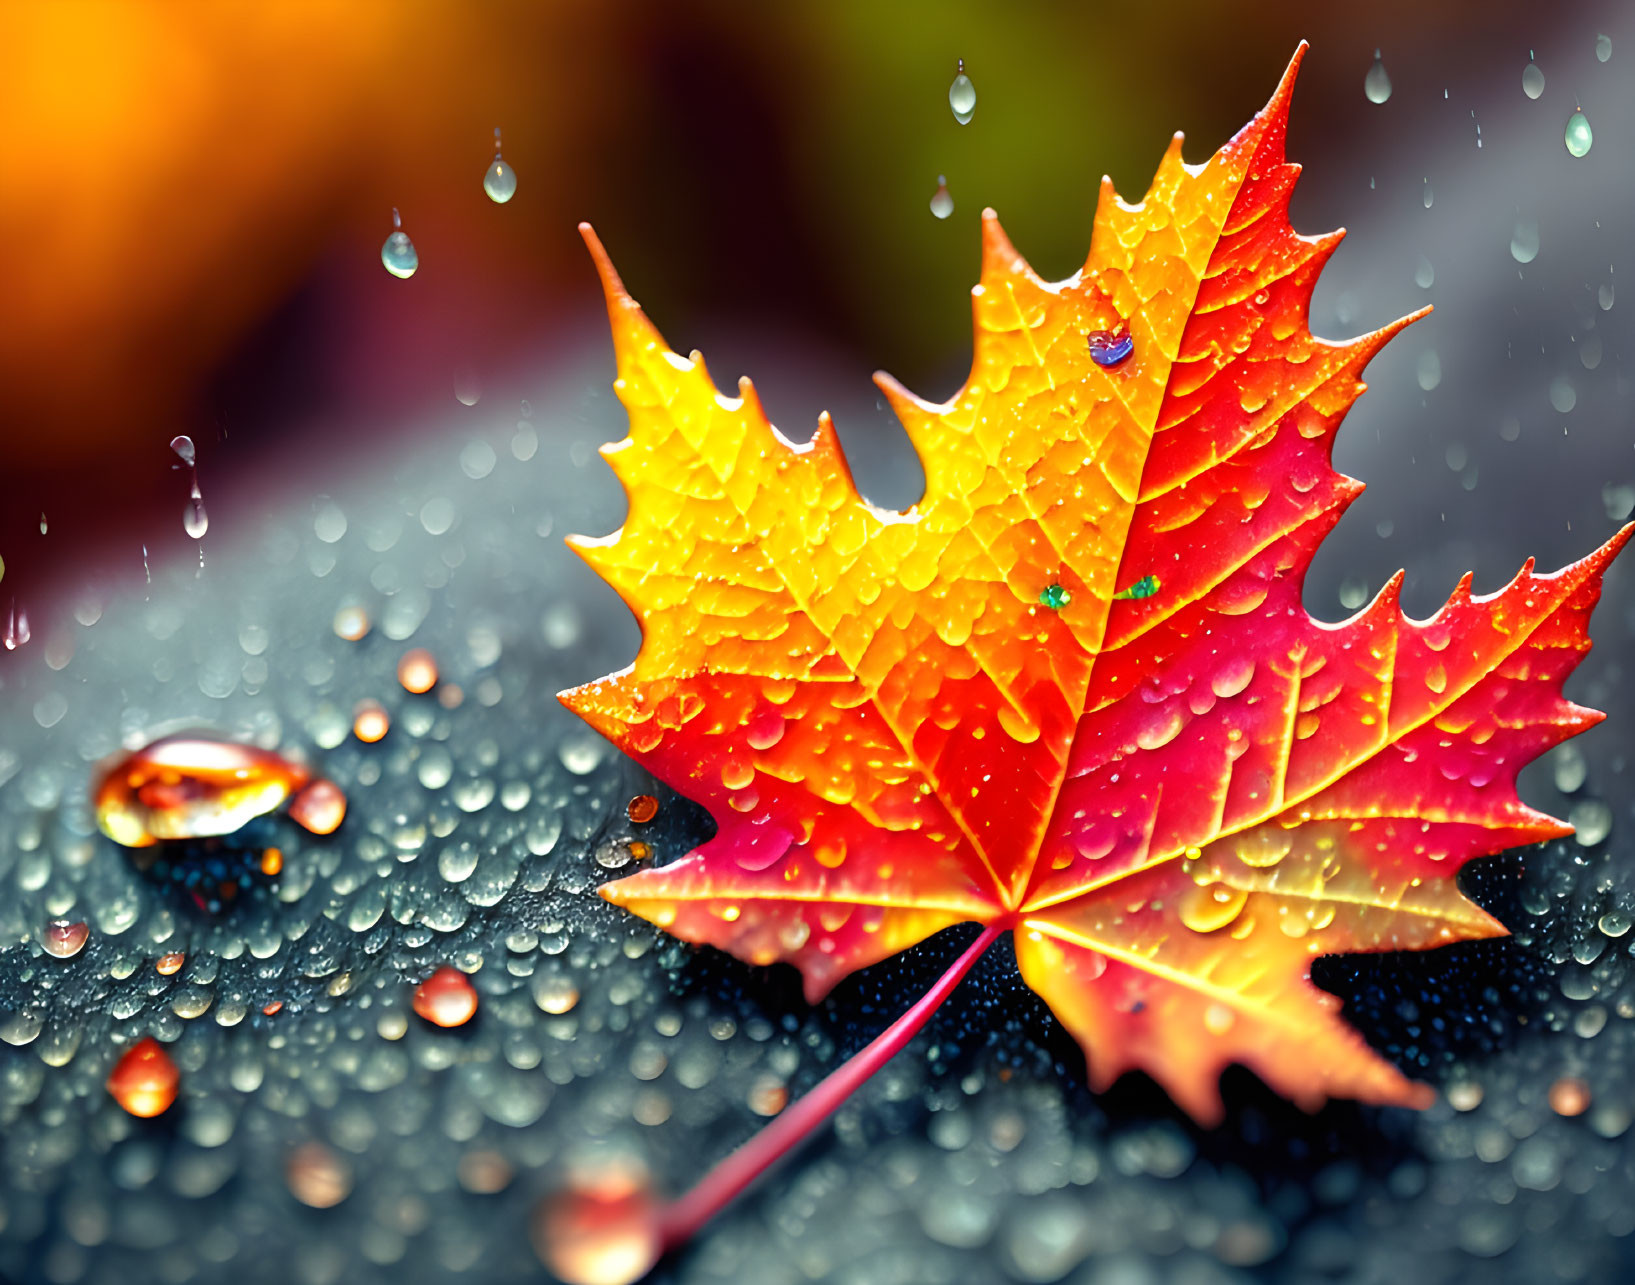 Colorful Autumn Leaf with Water Droplets on Blurred Background